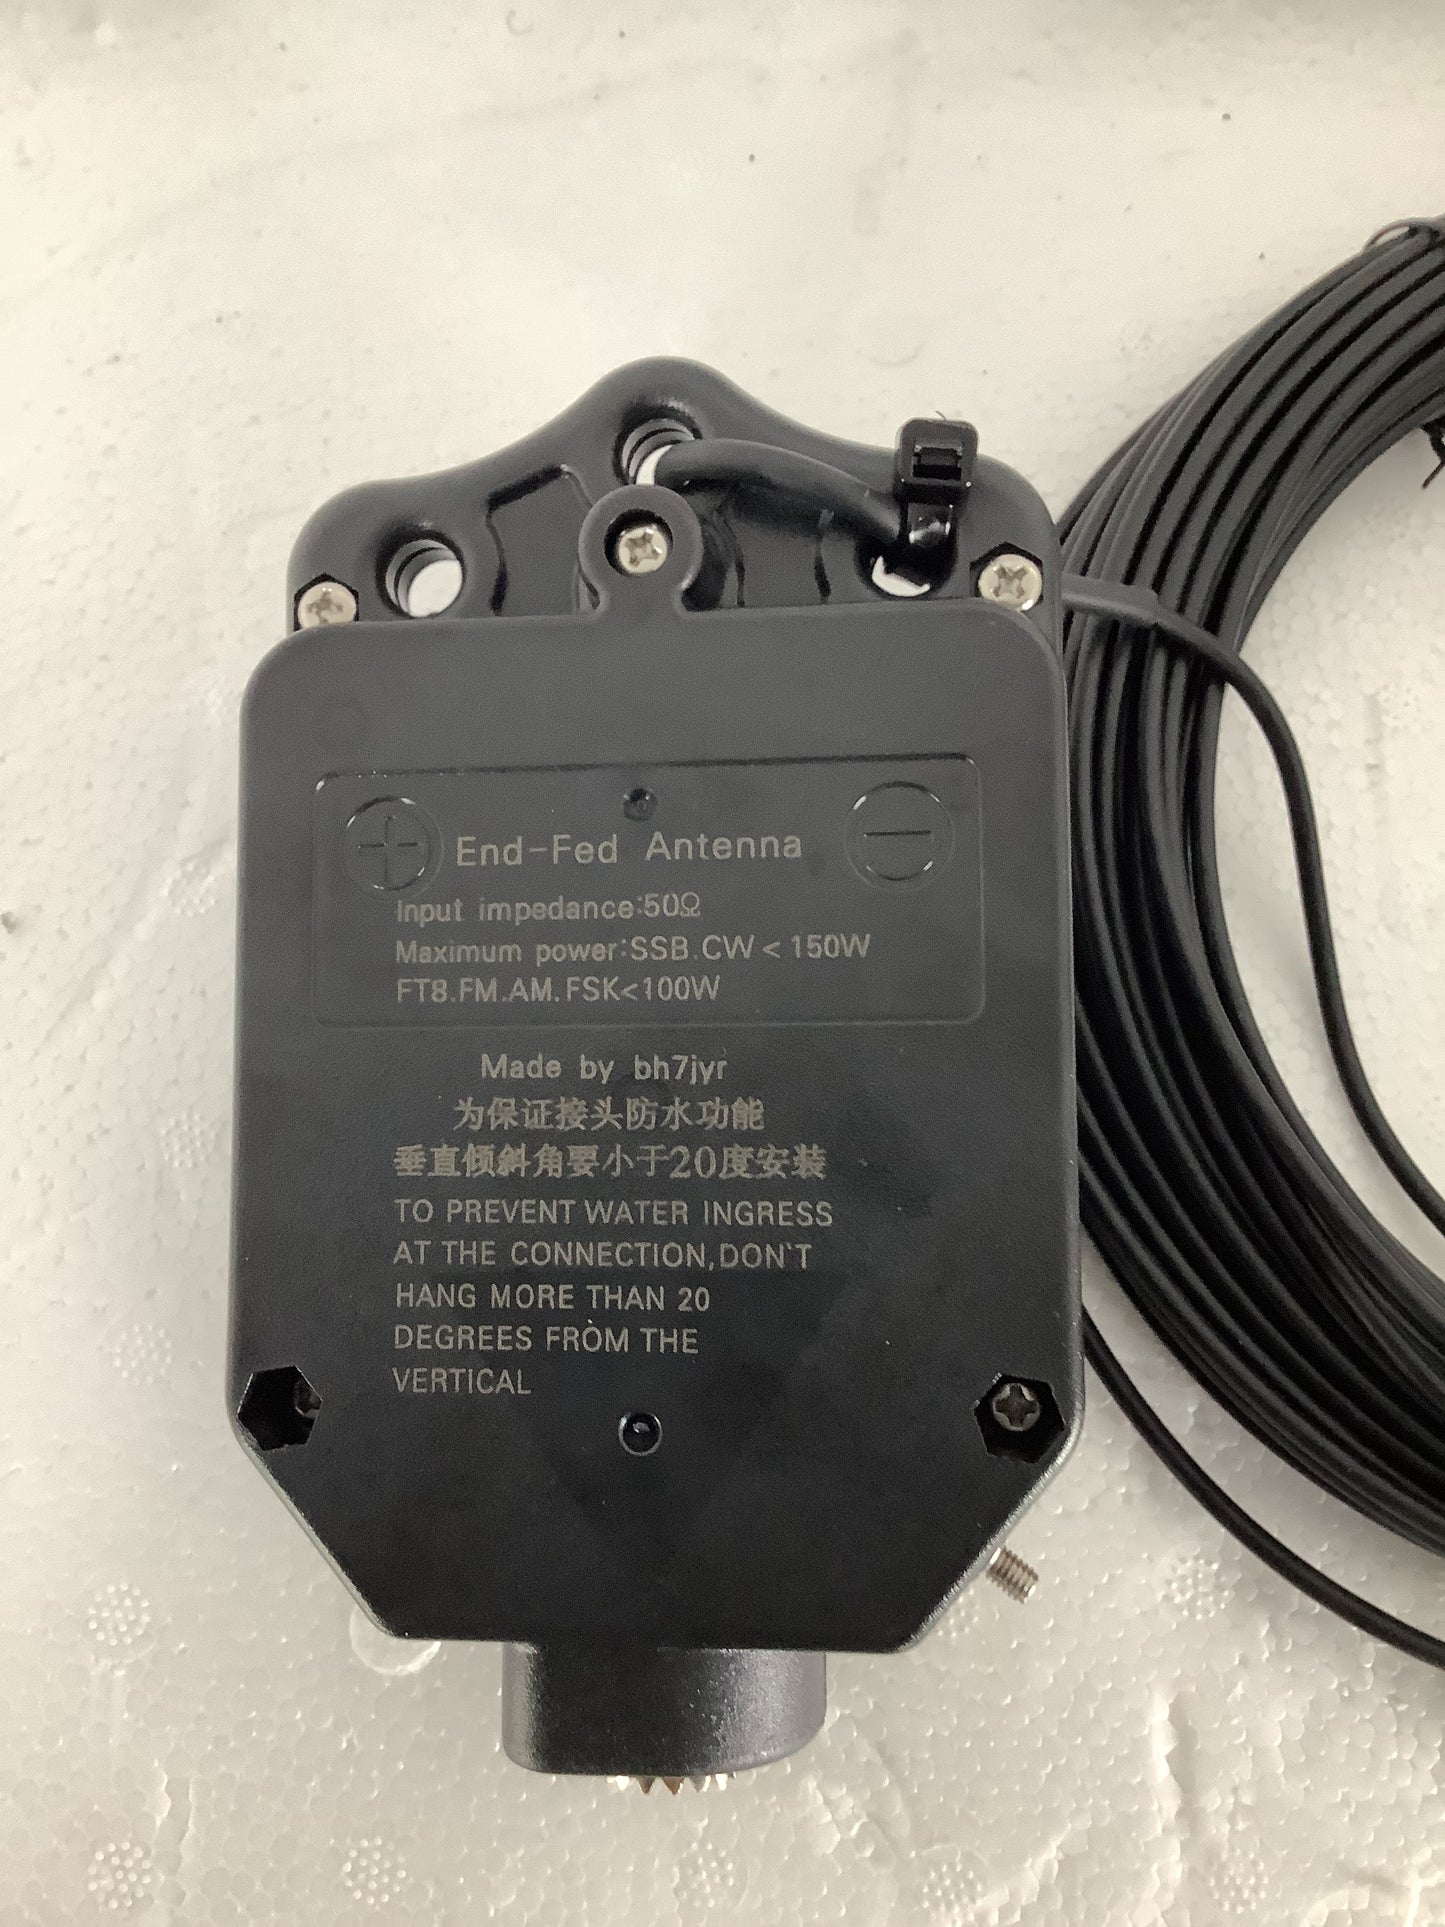 150W Multi-Band End Fed Half Wave Antenna 4 Band 1:64 Balun 10-40 Meter Wave